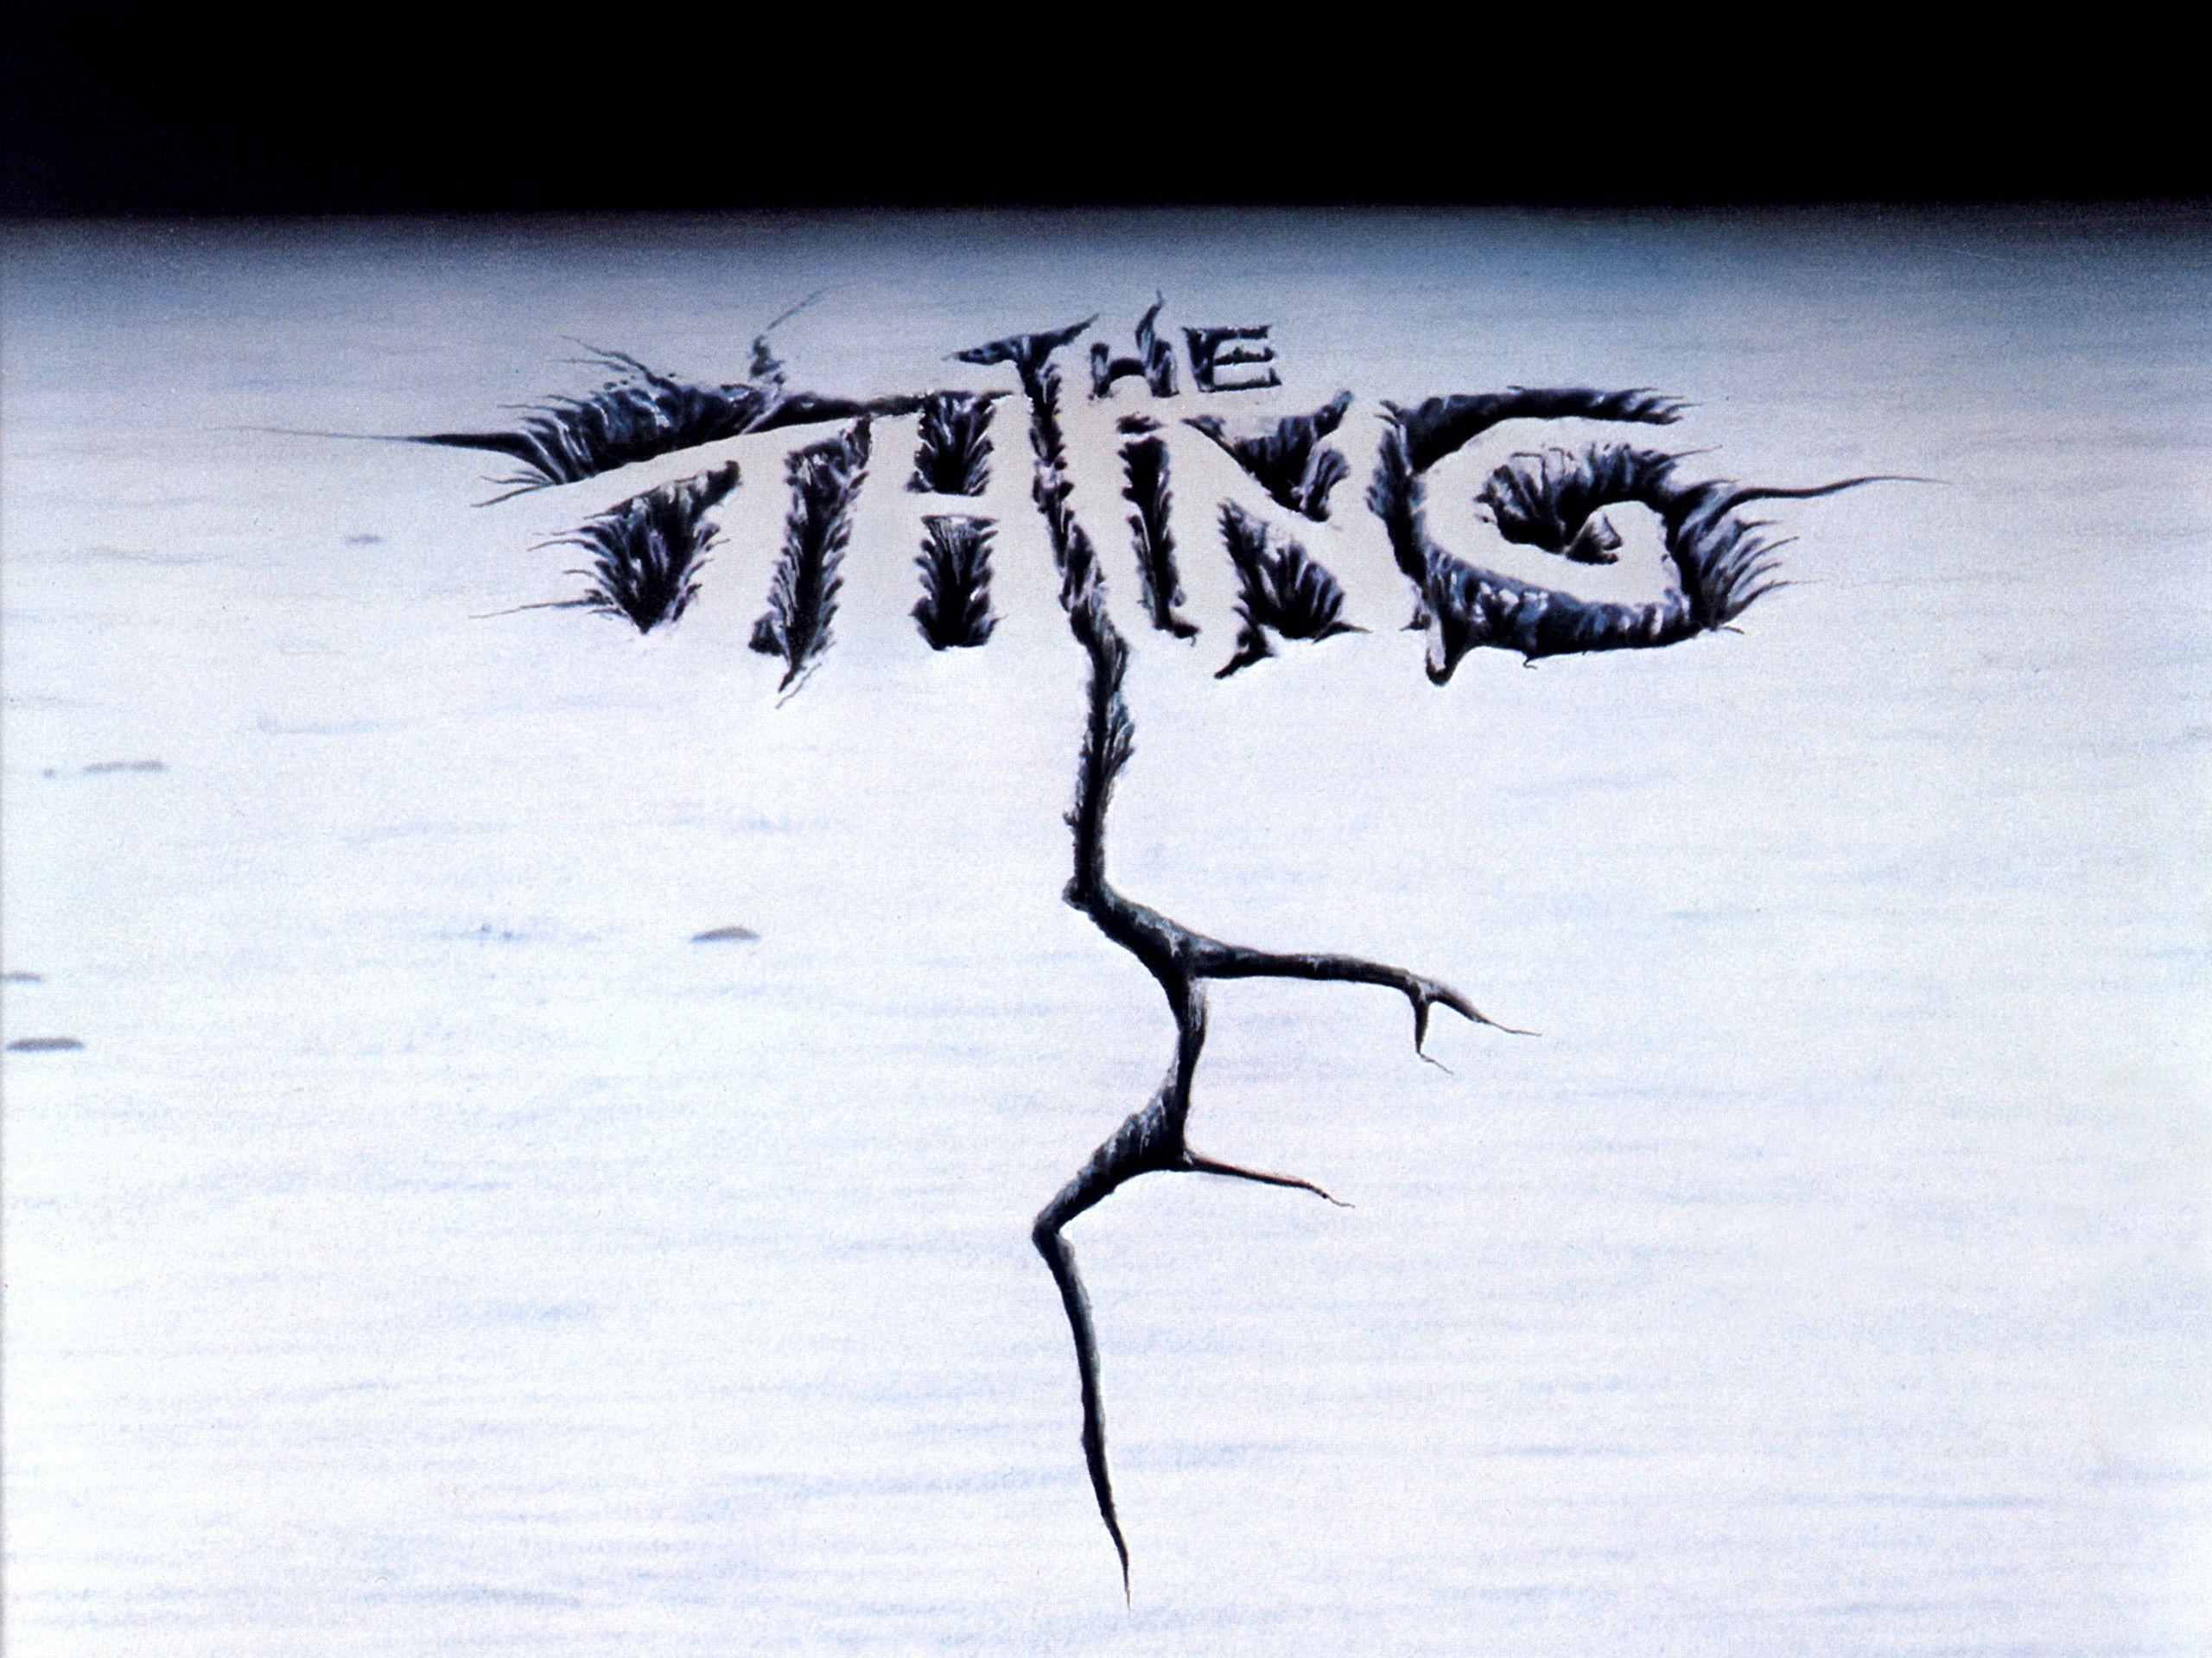 The Thing (1982) Computer Wallpaper, Desktop Background